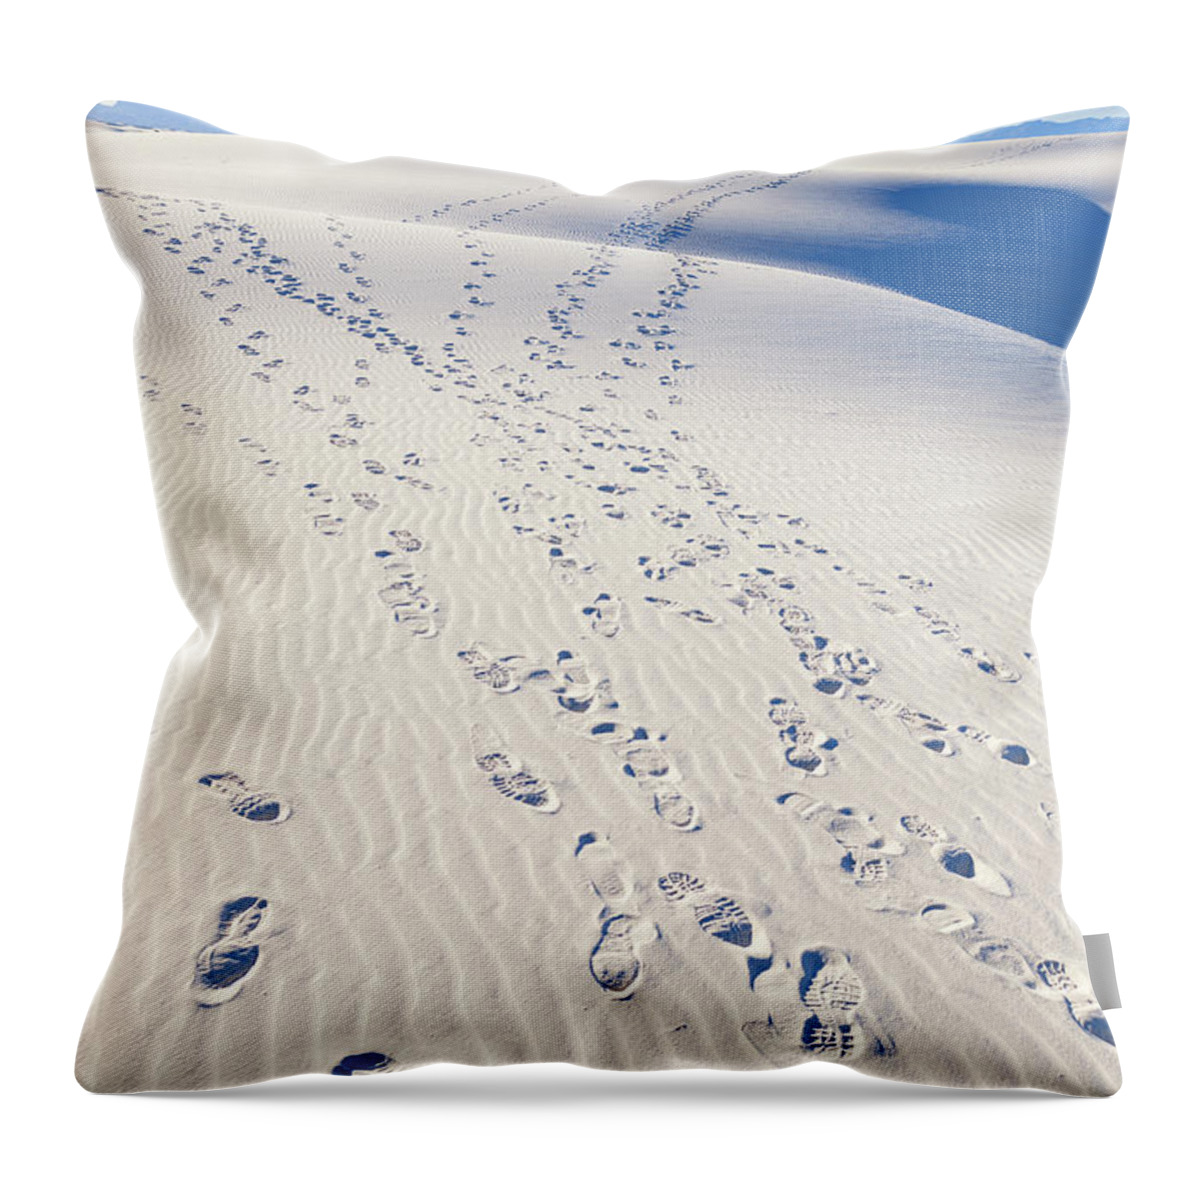 Chihuahuan Desert Throw Pillow featuring the photograph White Sands Gypsum Dunes #10 by Raul Rodriguez